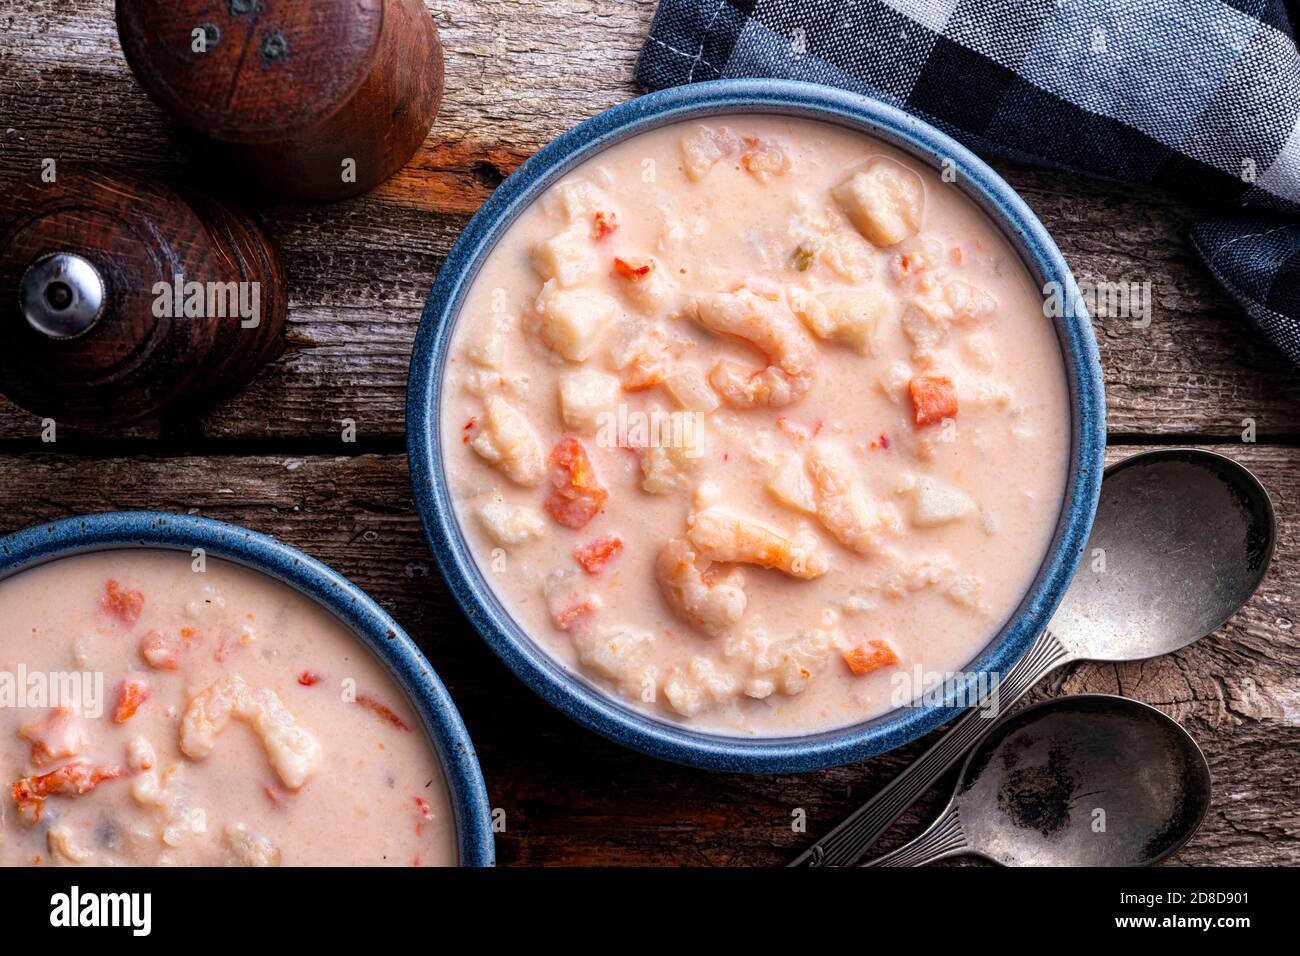 A bowl of delicious seafood chowder with lobster, shrimp, scallops, potato, carrots and cream. Stock Photo